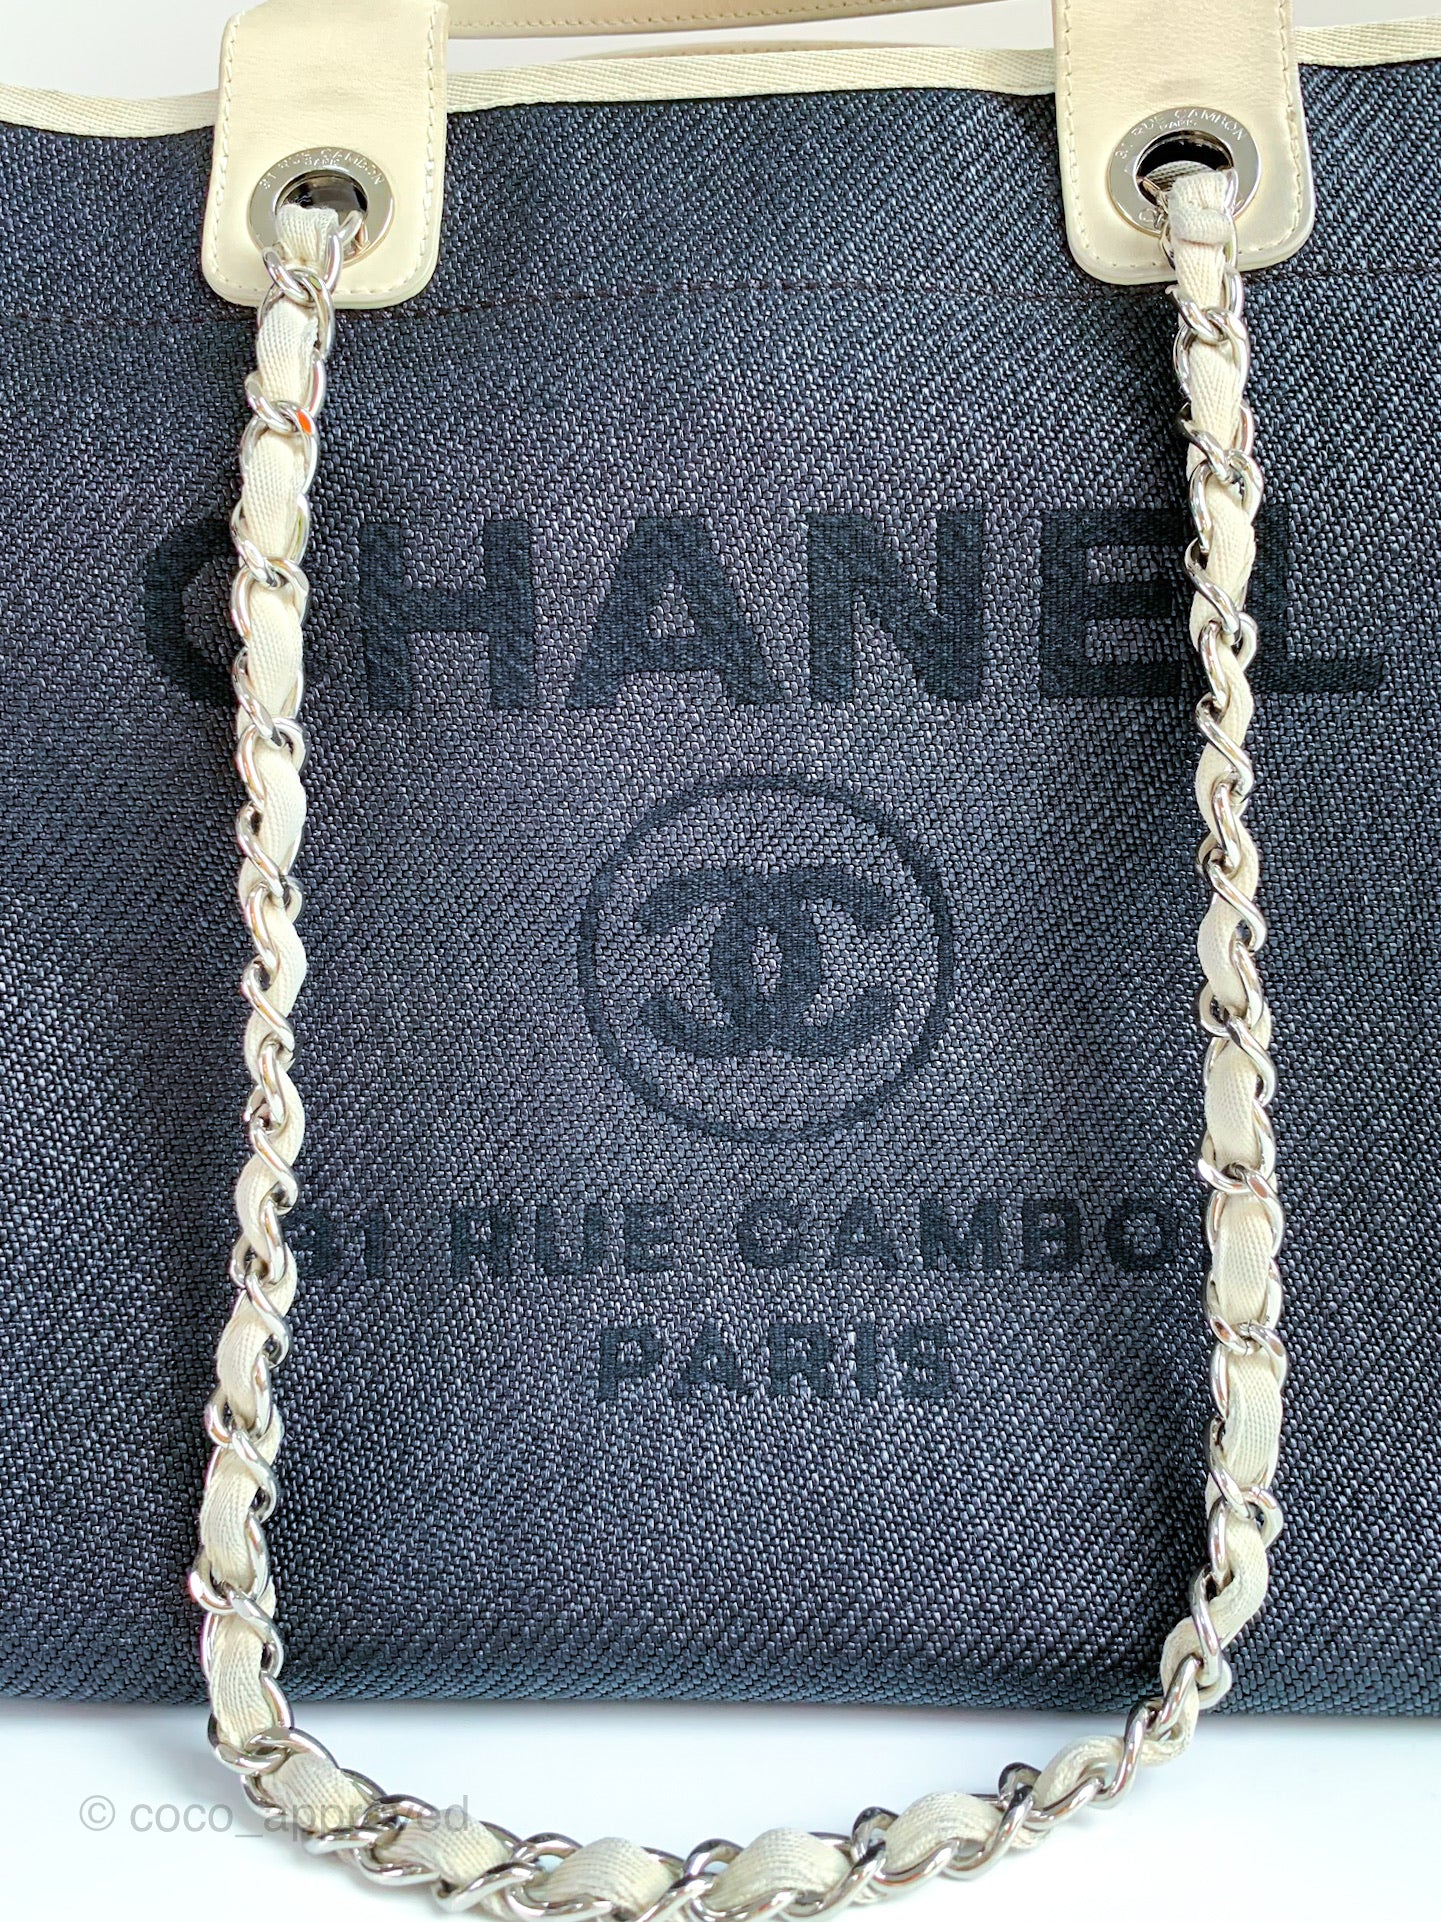 Chanel Deauville Small/Medium with Handles and Pouch, Beige with Light Gold  Hardware, New in Box GA001 - Julia Rose Boston